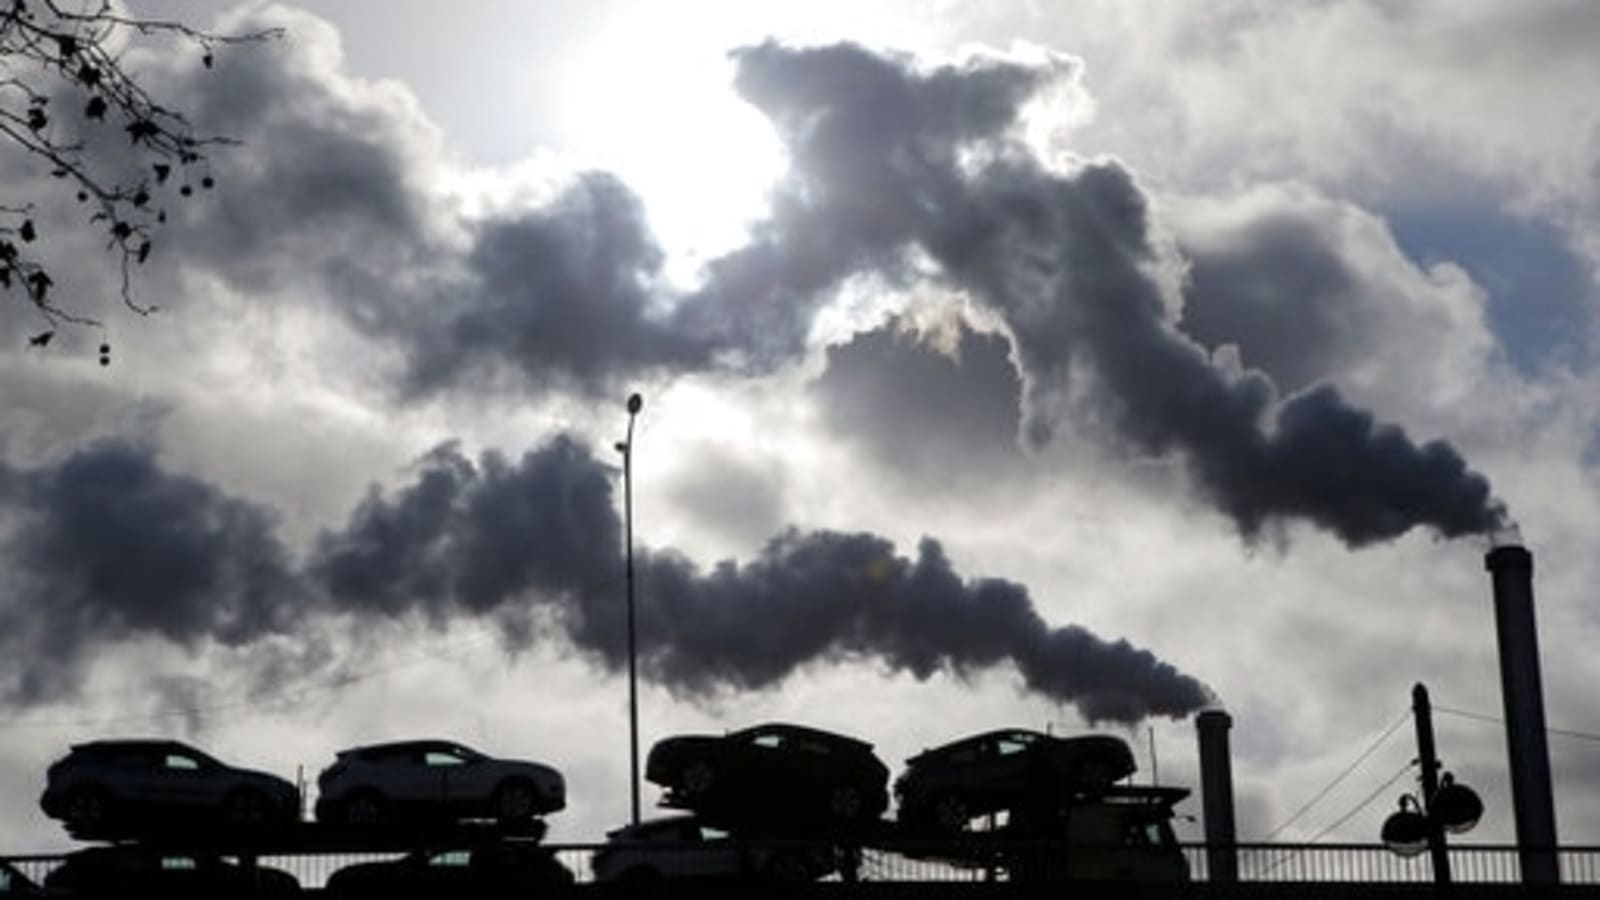 Global CO2 levels this May rose to highest in 4 million years: Report